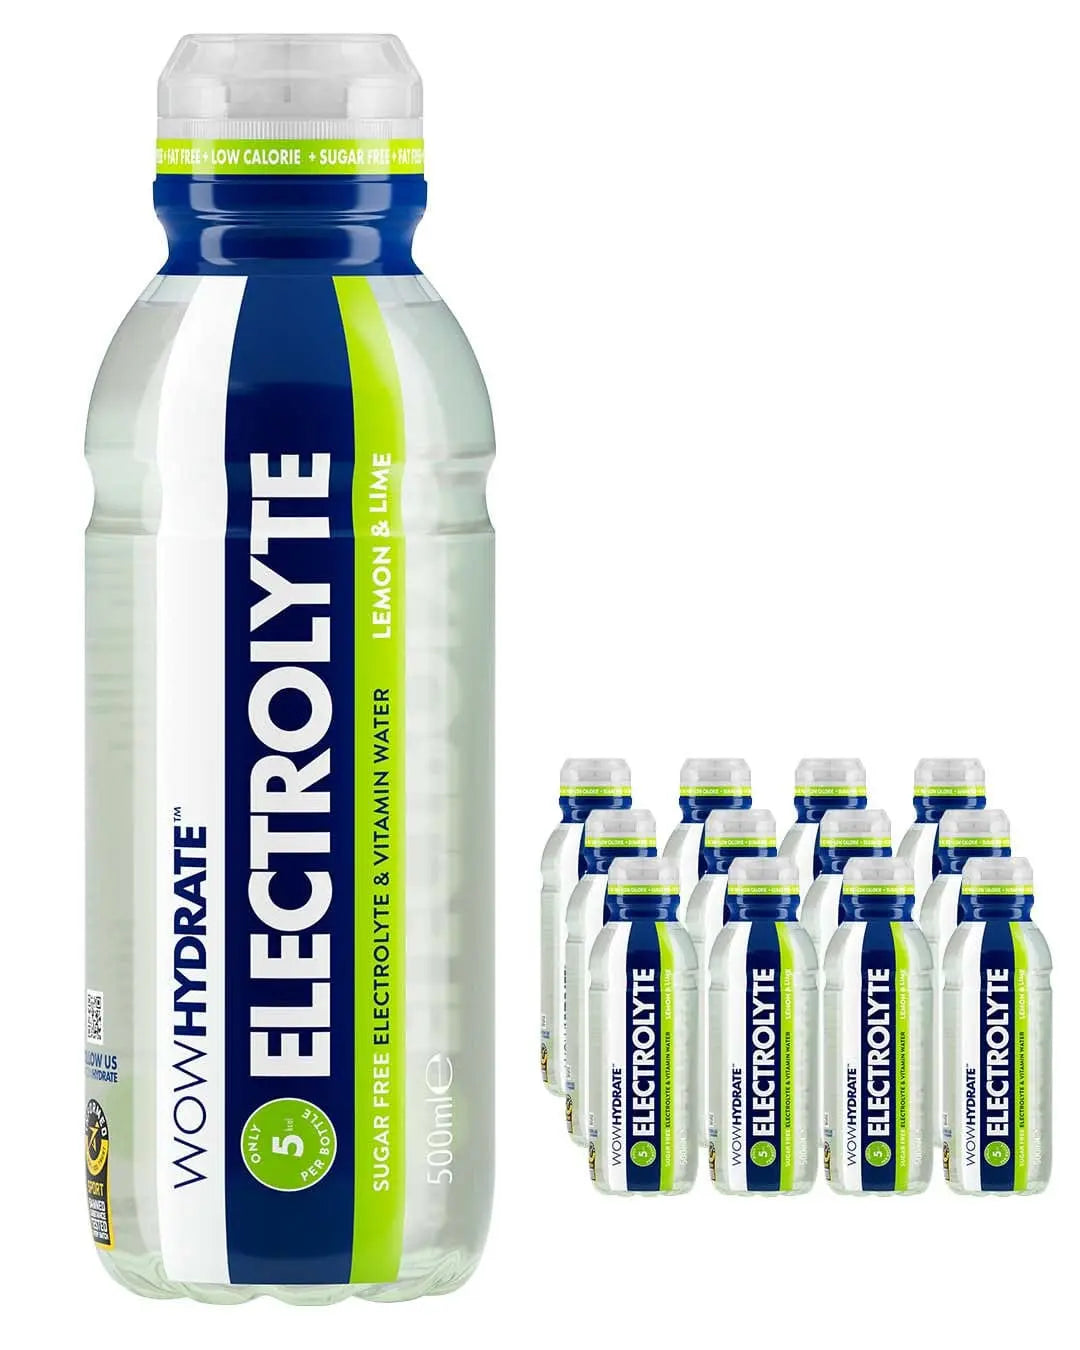 Wow Hydrate Electrolyte Lemon & Lime Drink Multipack, 12 x 500 ml Soft Drinks & Mixers